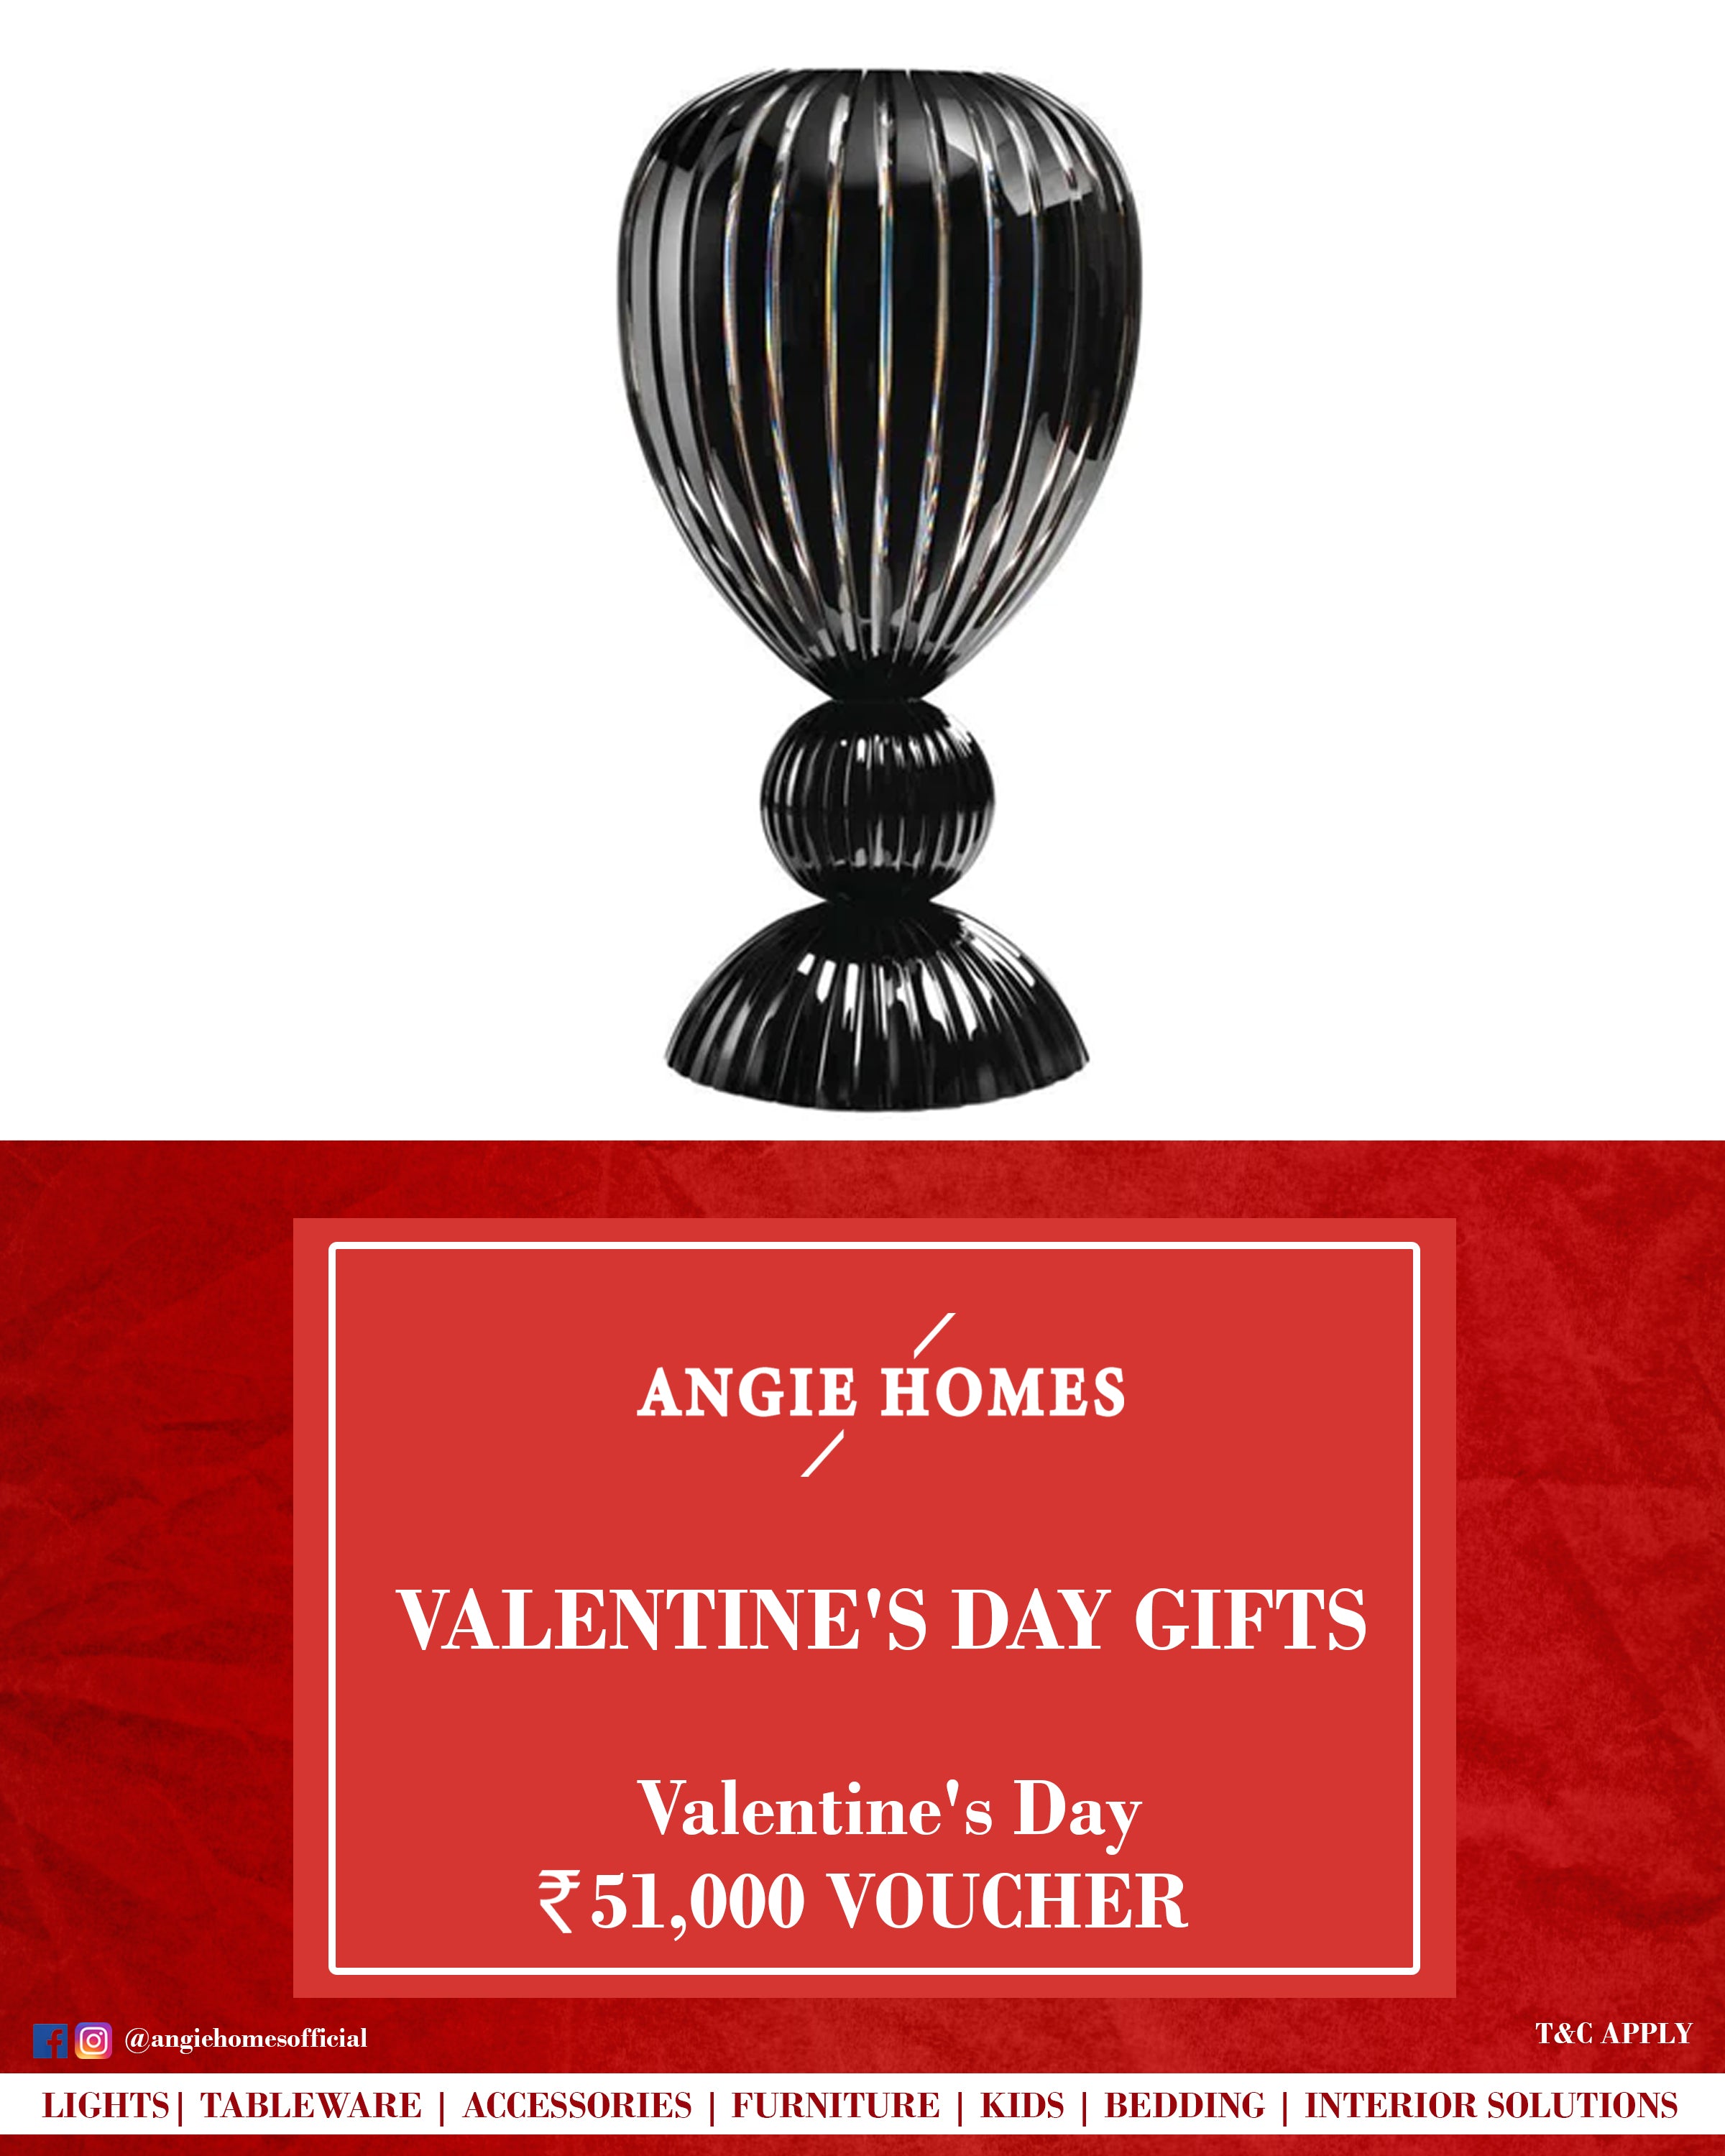 Online Happy Valentine's Day Gift Card Voucher for Black Vases ANGIE HOMES